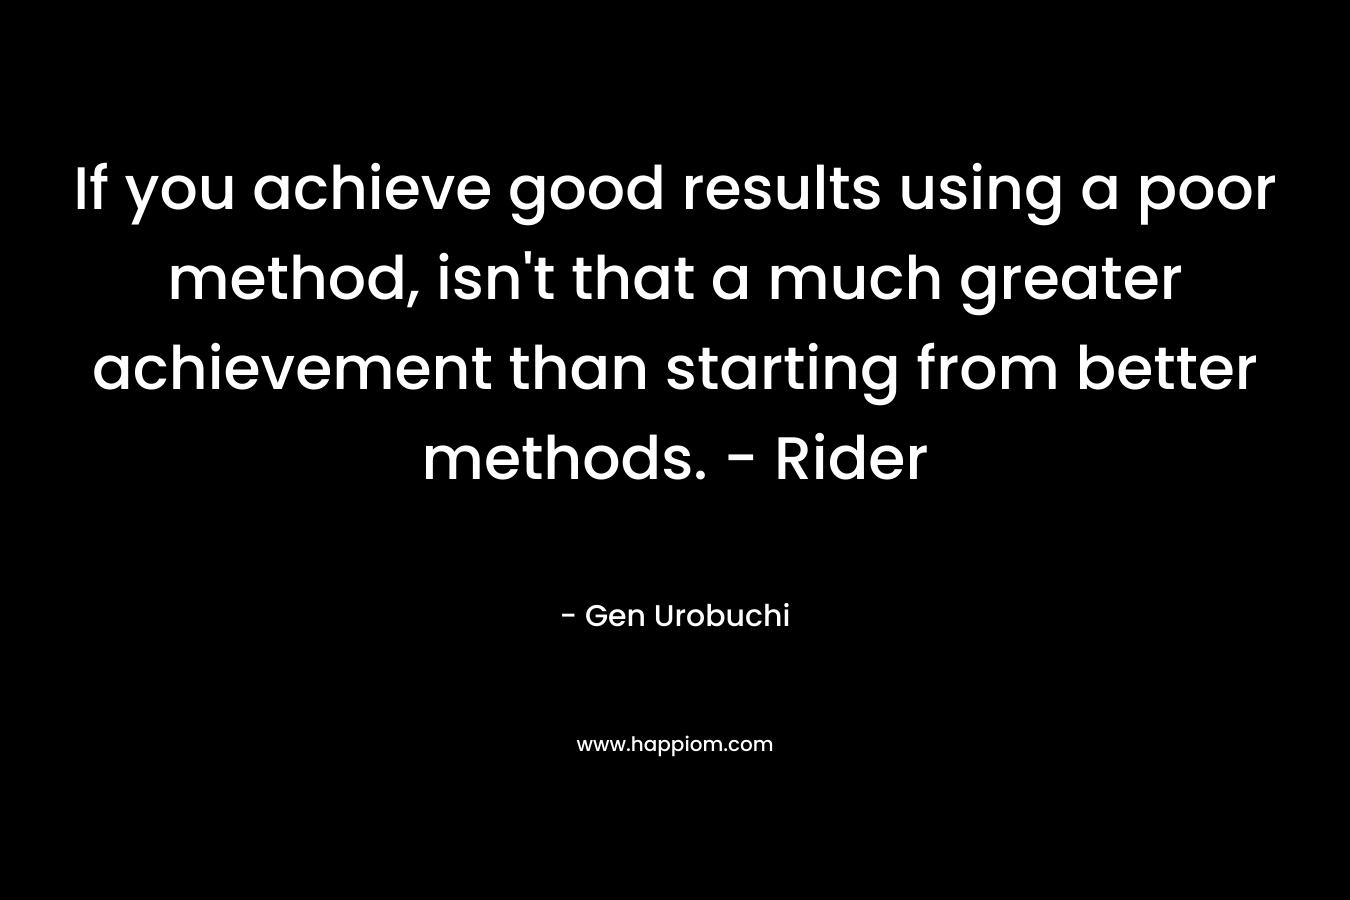 If you achieve good results using a poor method, isn't that a much greater achievement than starting from better methods. - Rider